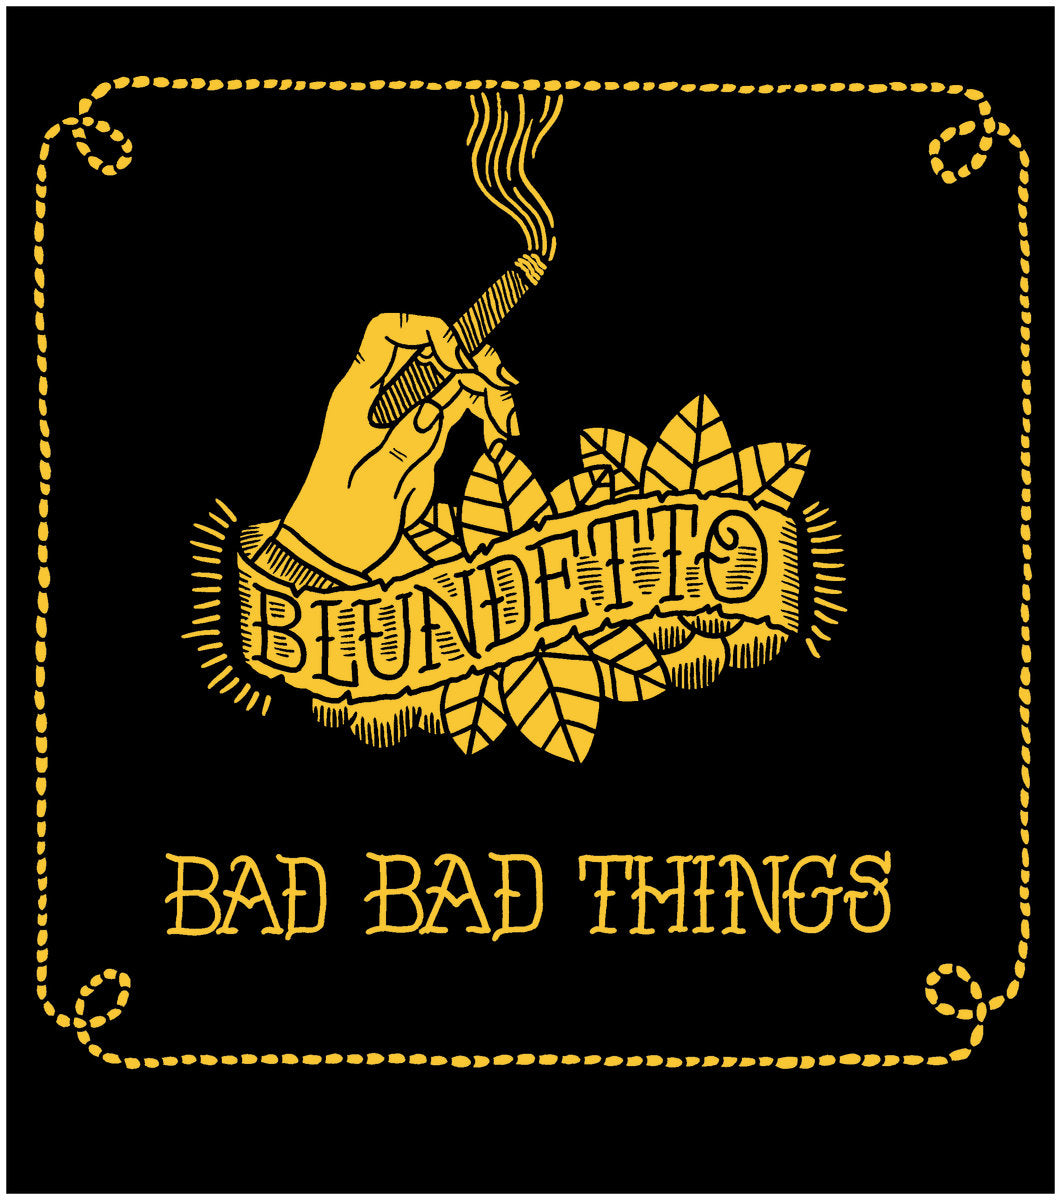 Blundetto - Bad Bad Things Vinil - Salvaje Music Store MEXICO